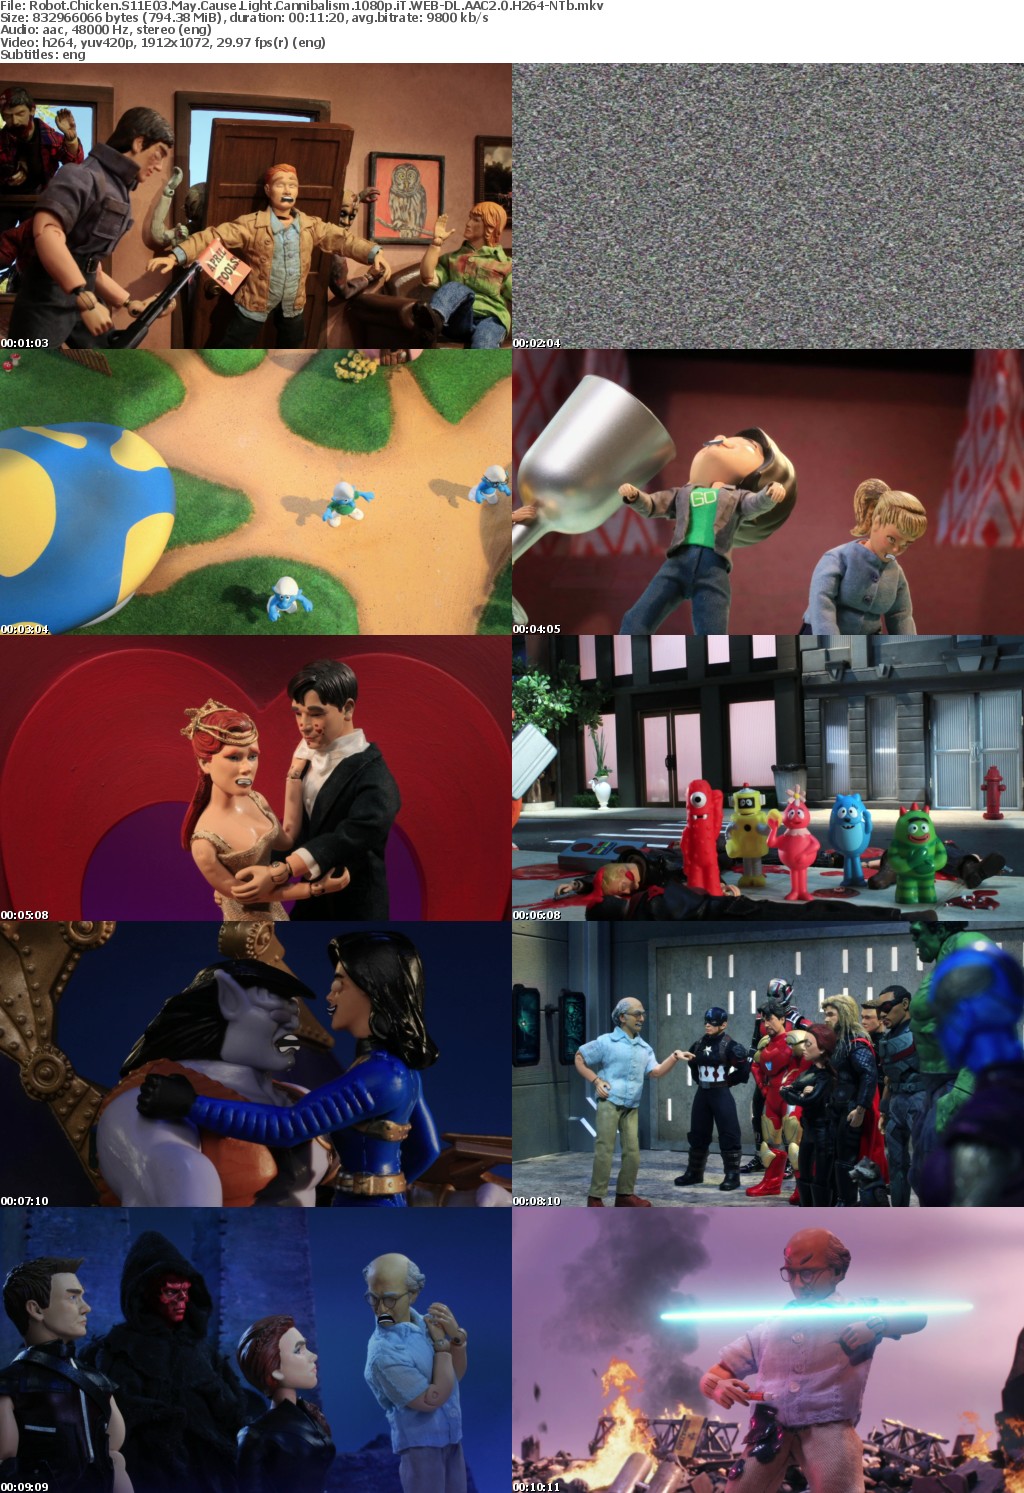 Robot Chicken S11E03 May Cause Light Cannibalism 1080p WEB-DL AAC2 0 H264-NTb